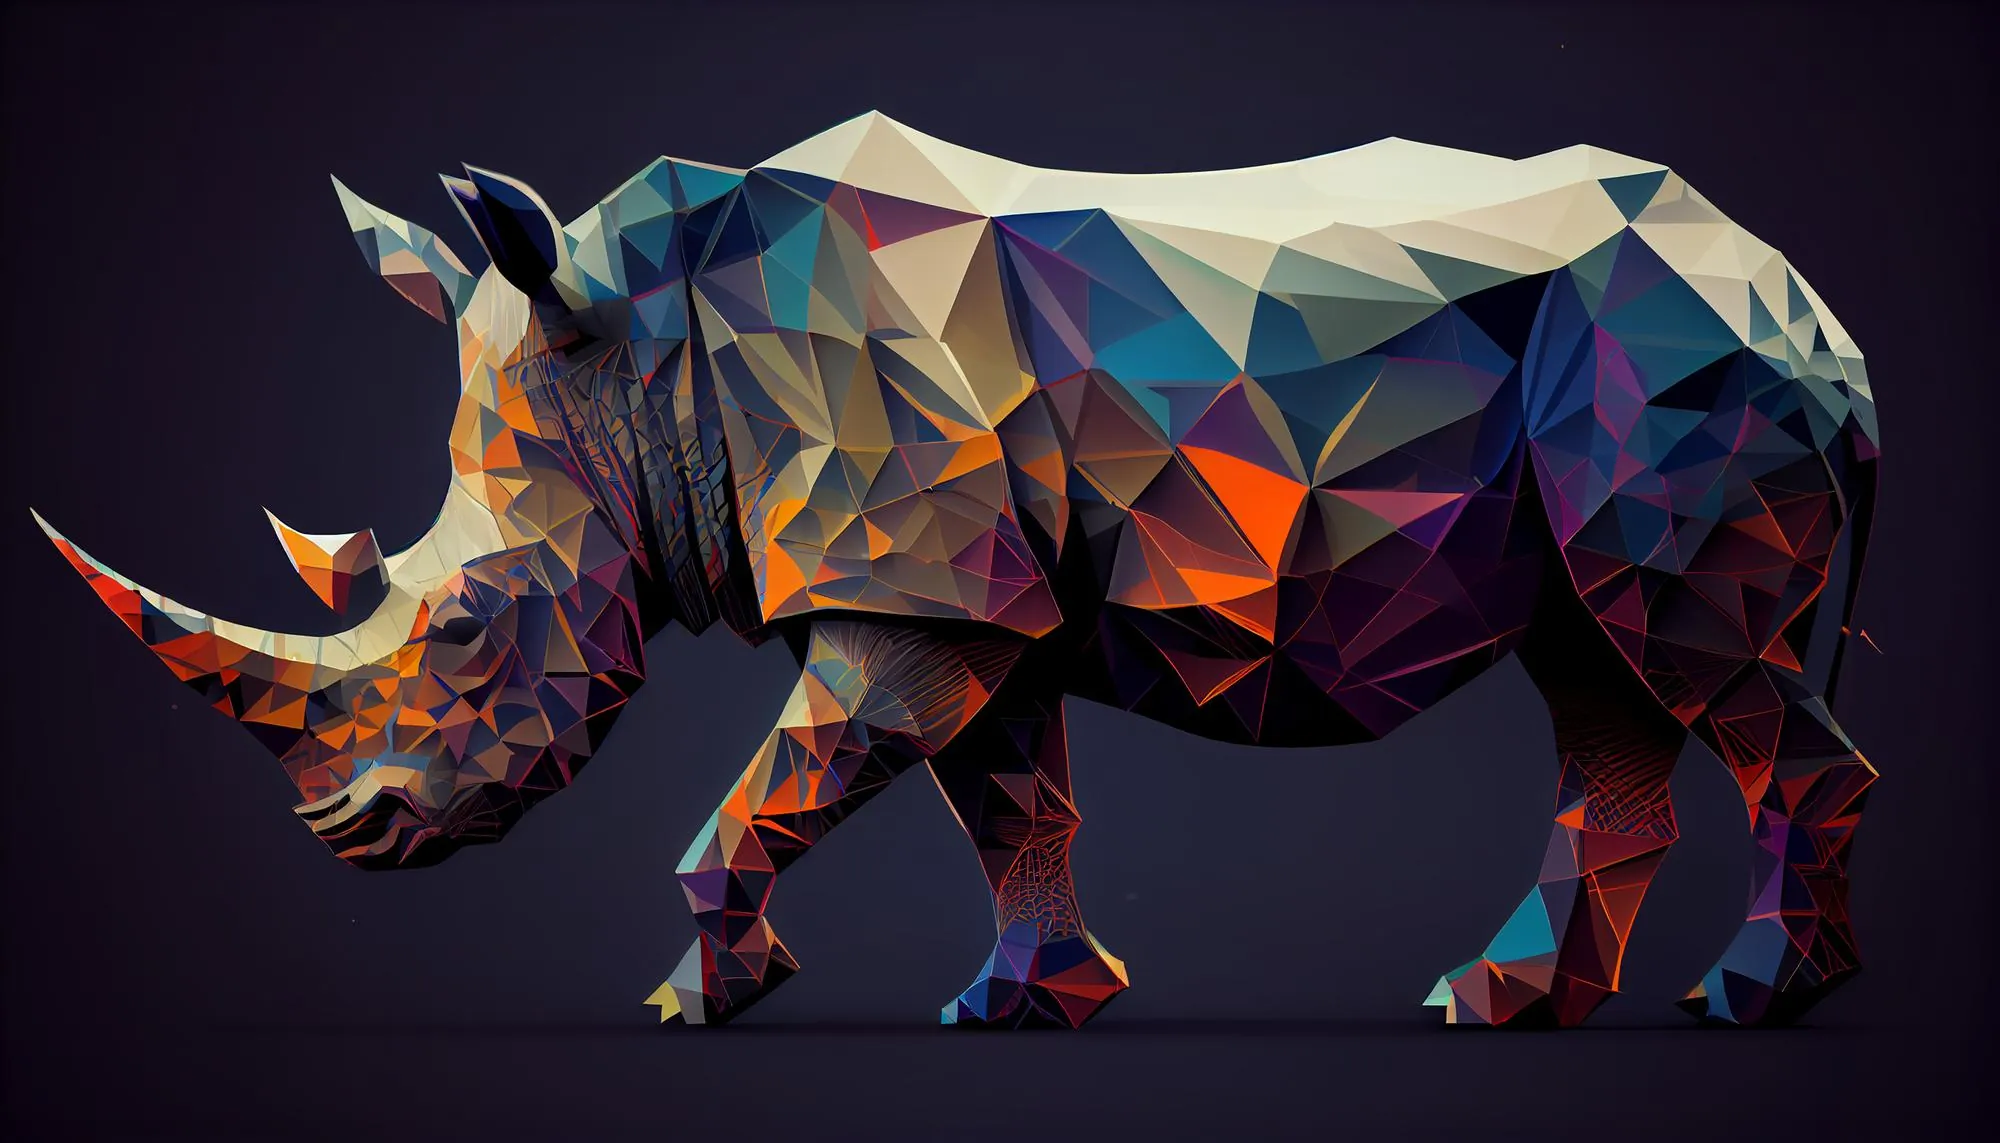 a-rhinoceros-is-depicted-in-a-low-poly-style